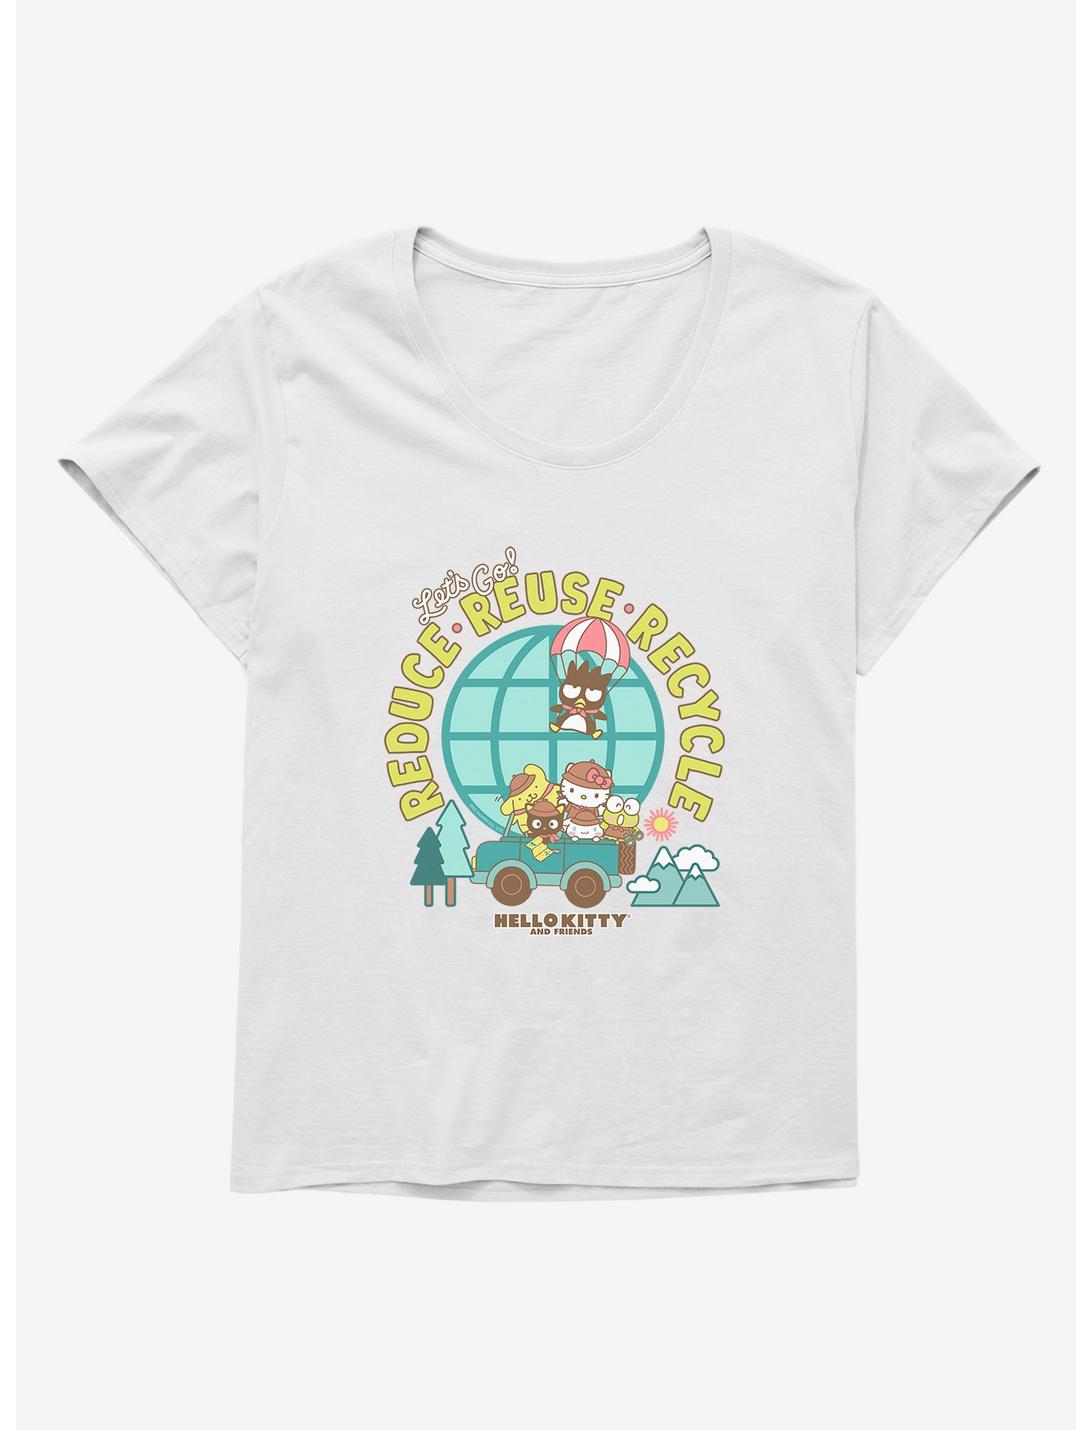 Hello Kitty & Friends Earth Day Reduce, Reuse, Recycle Girls T-Shirt Plus Size, , hi-res